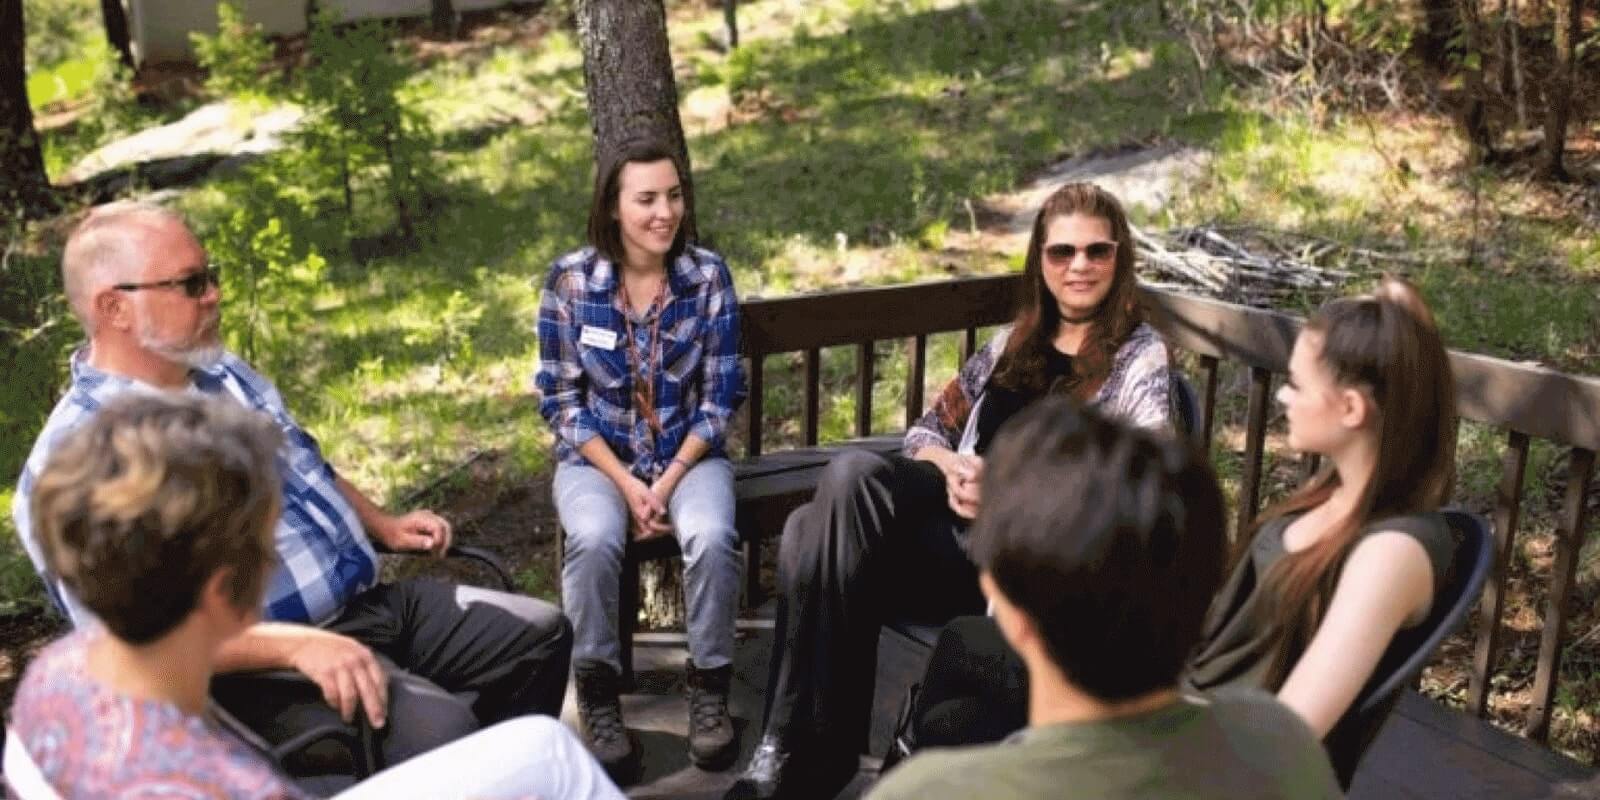 Group of people in the woods conducting therapy session